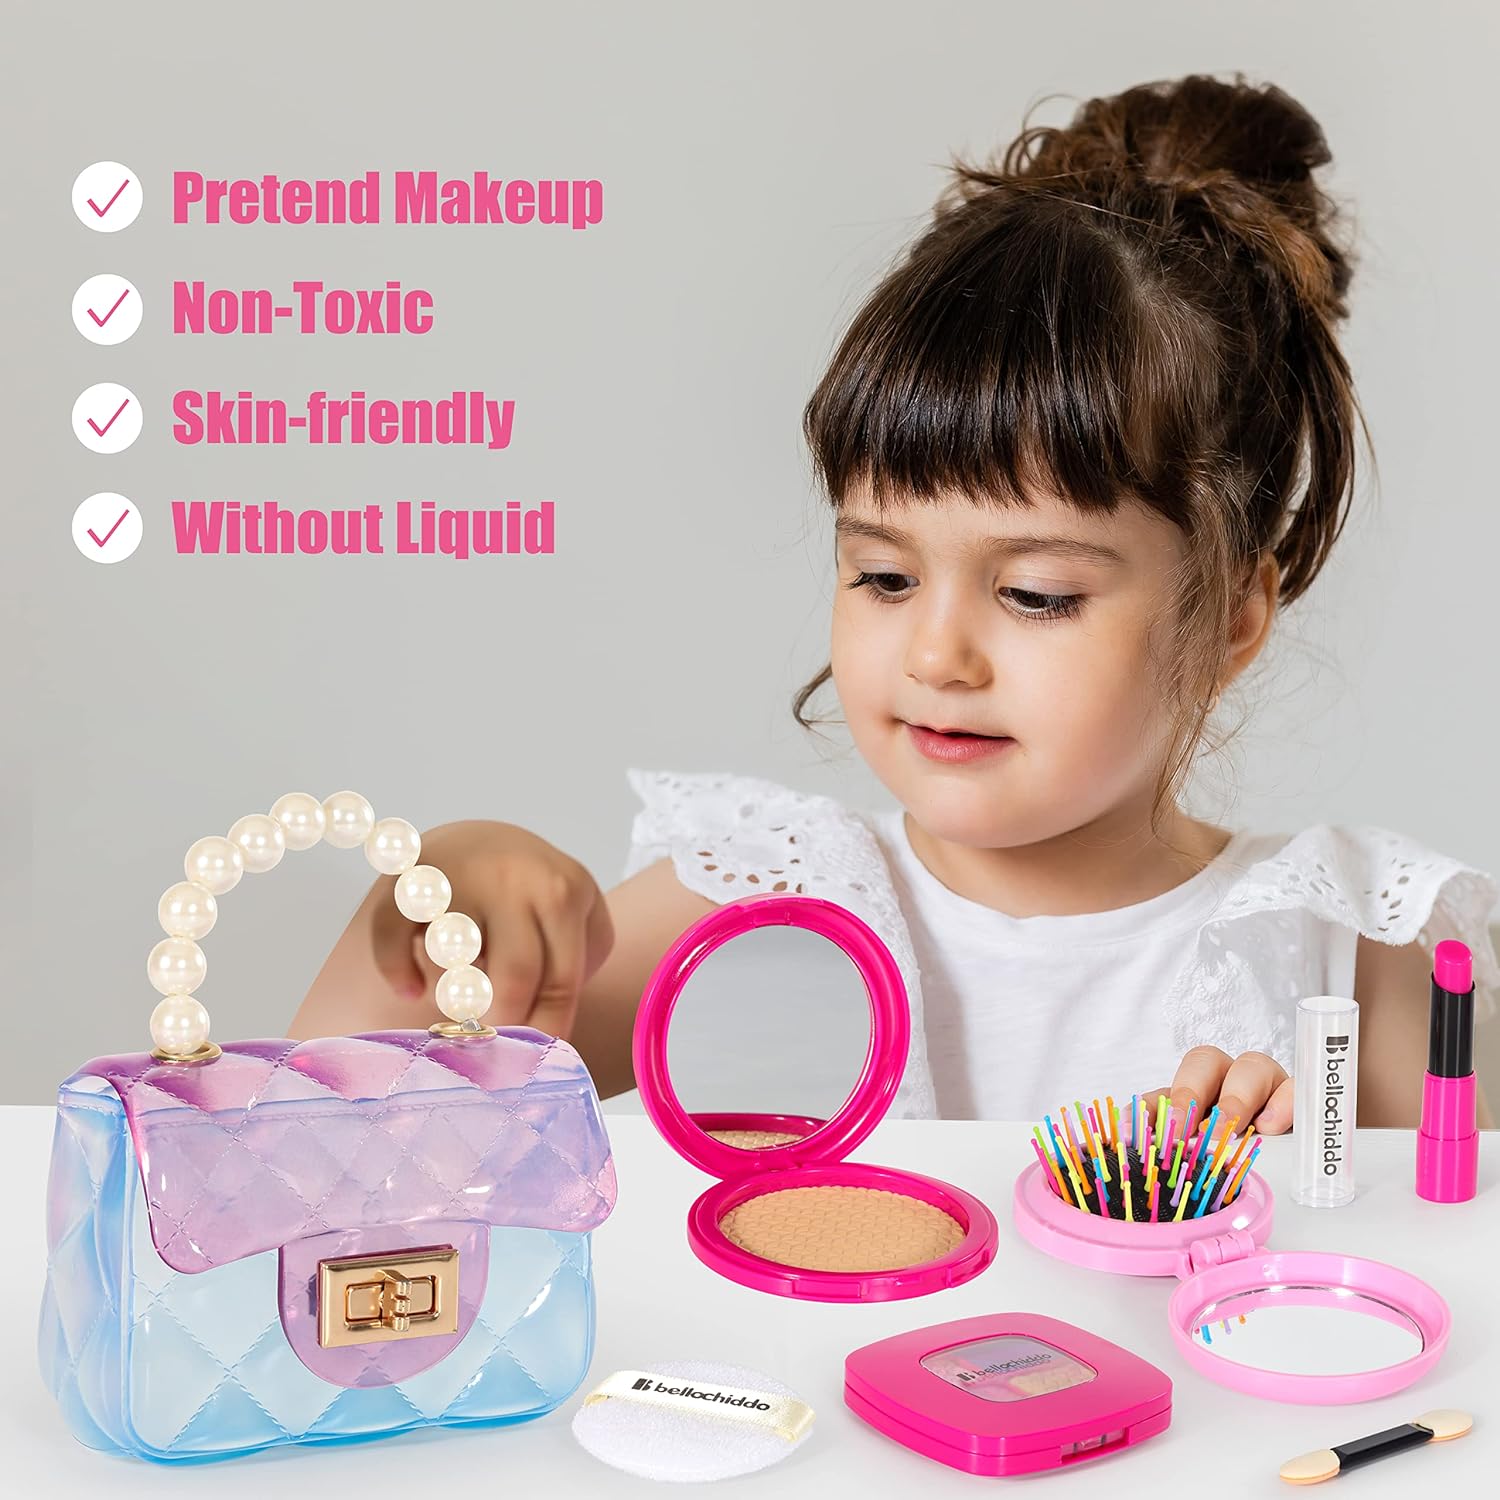 3 years and up BELLOCHIDDO Purse for Little Girls- Kids Makeup Kit for Girls,Princess Play Purse Toy with Cosmetics Accessories ,Pretend Play